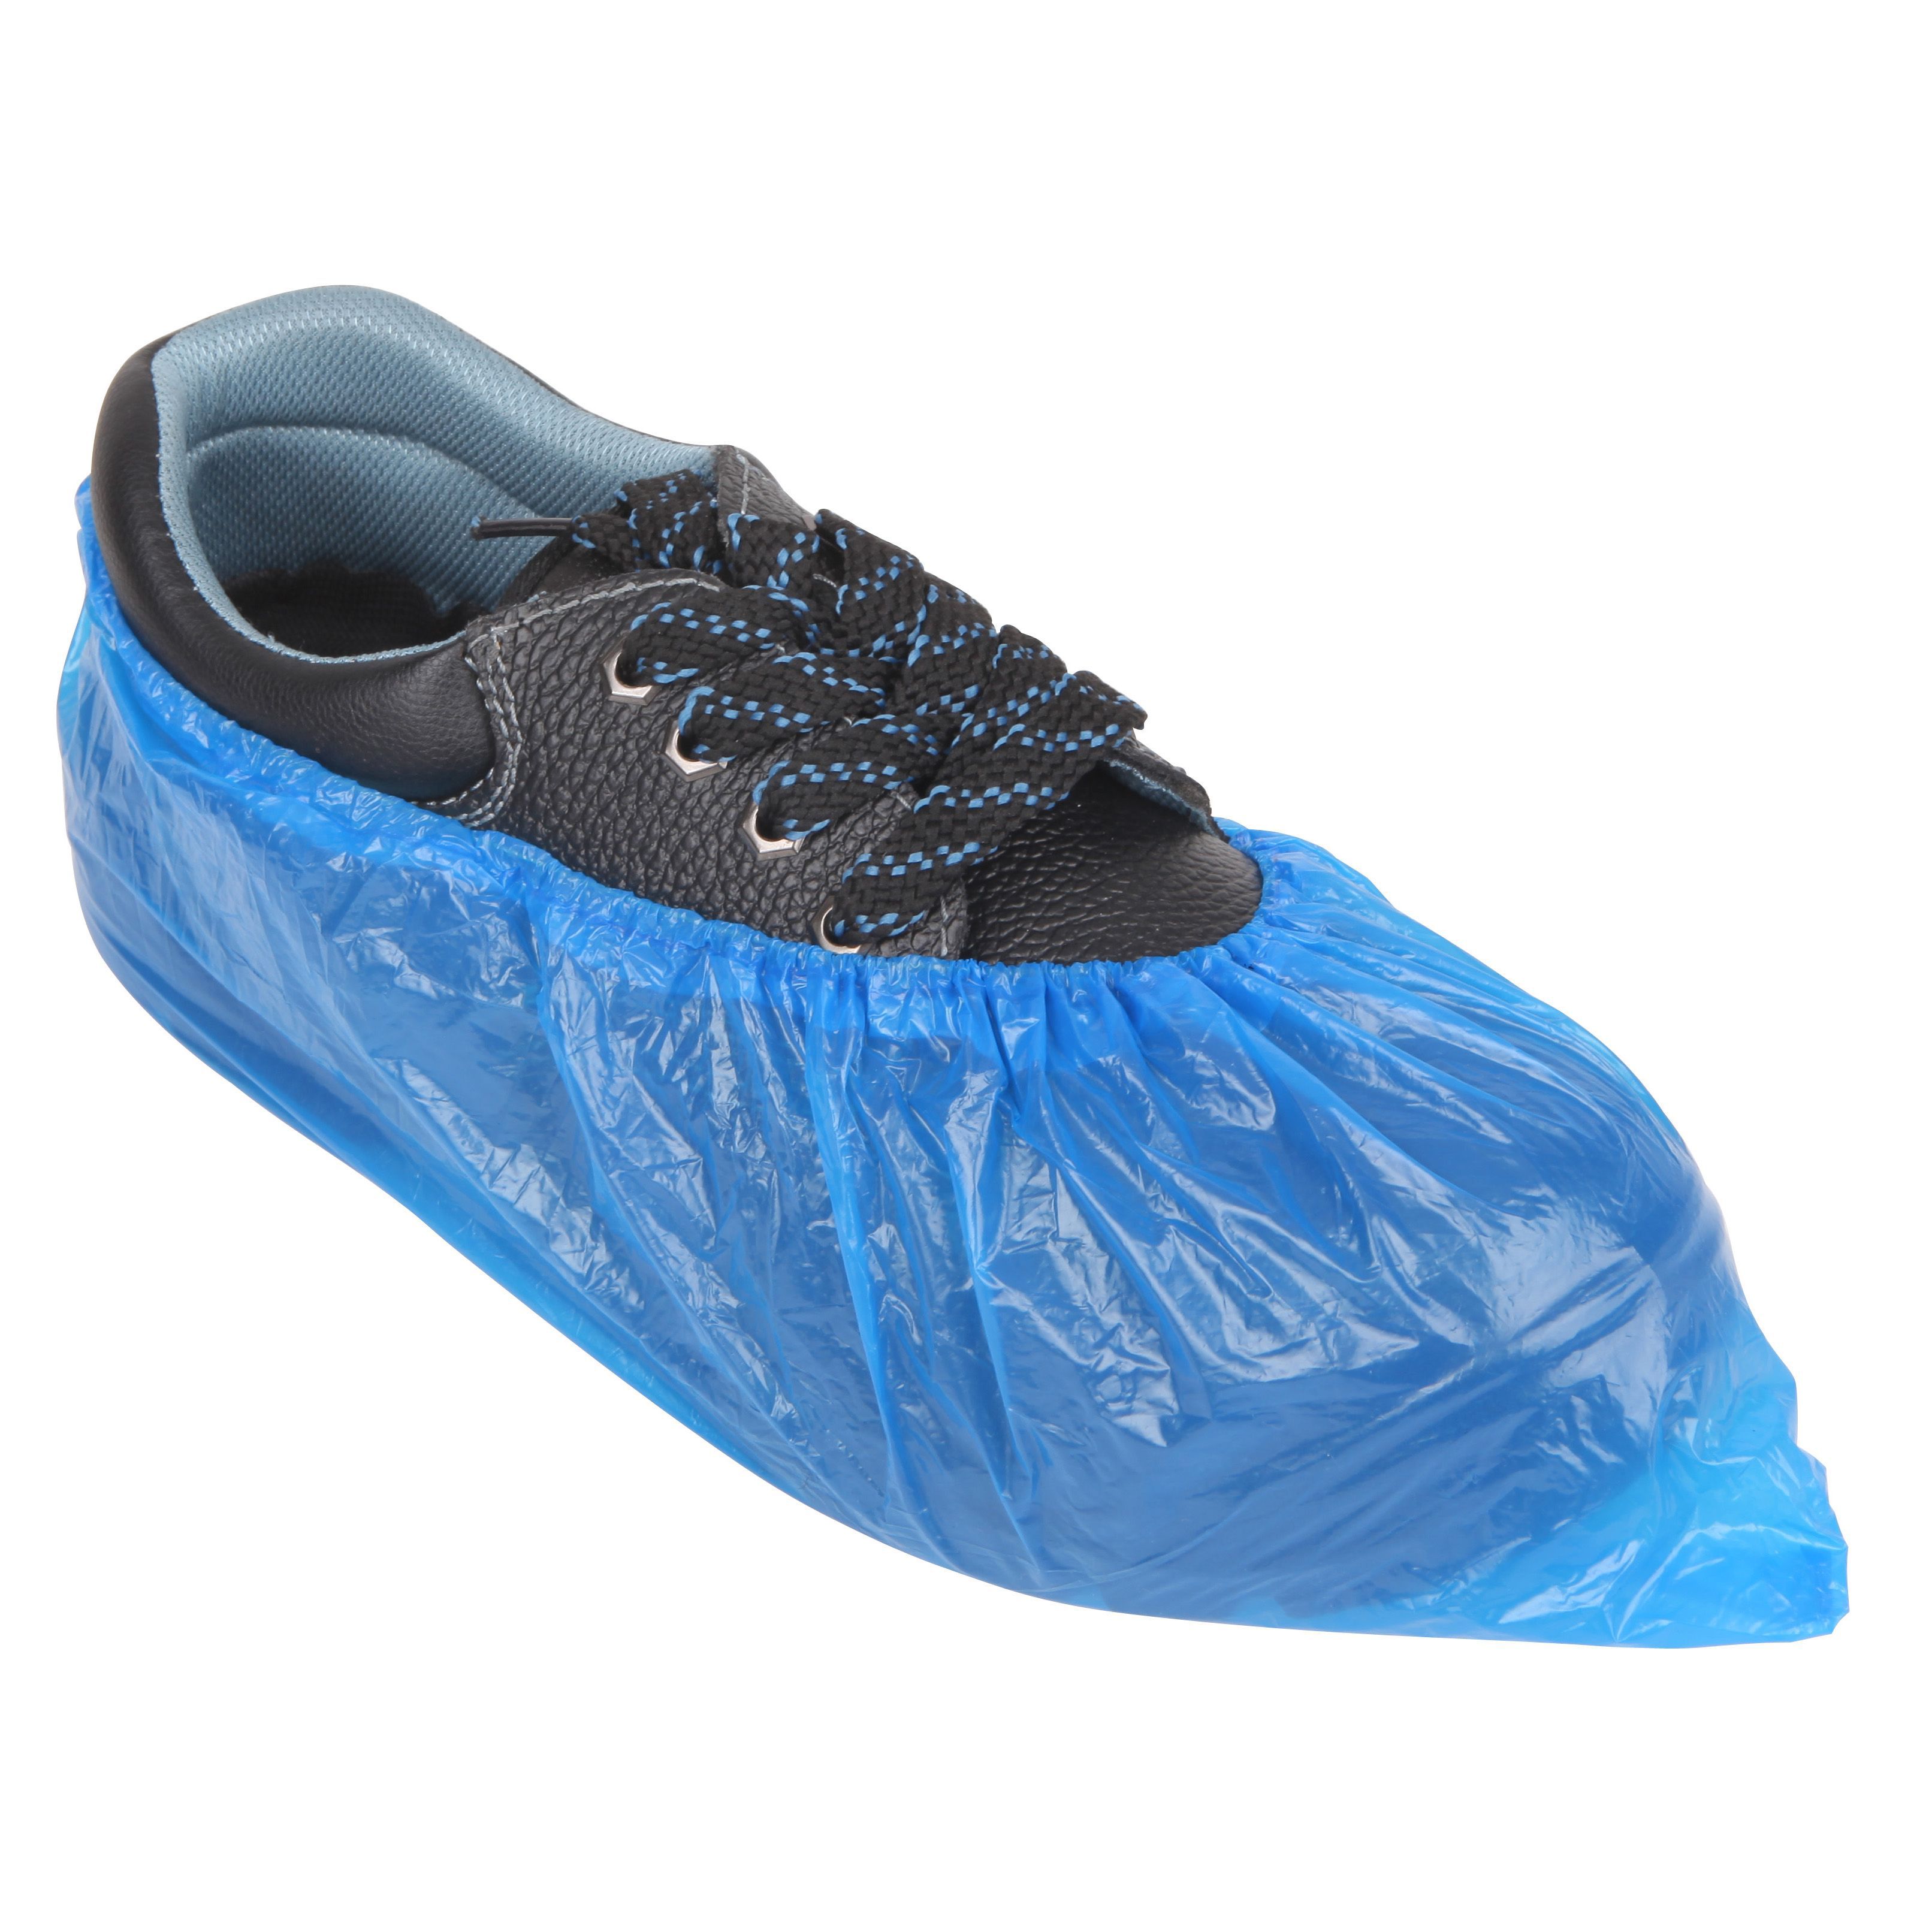 Disposable Shoe Covers (100 pack) - Early Childhood Ireland